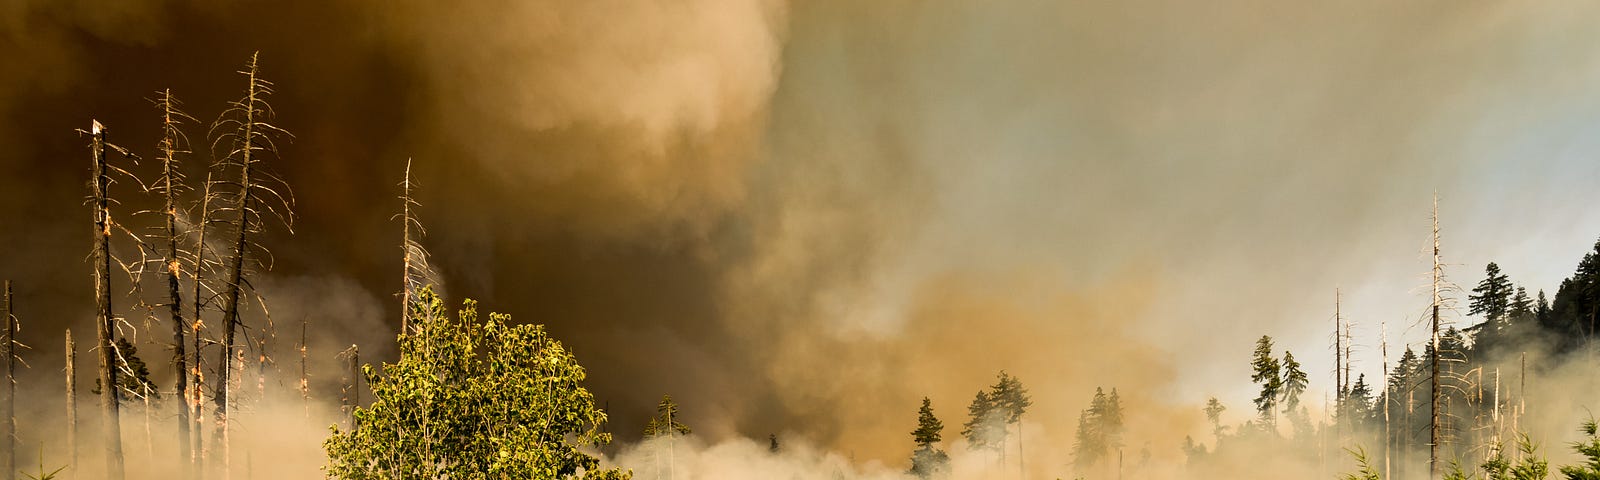 A white car is driving down a road as grey smoke fills the sky while fires burn the forest on the side of the road.